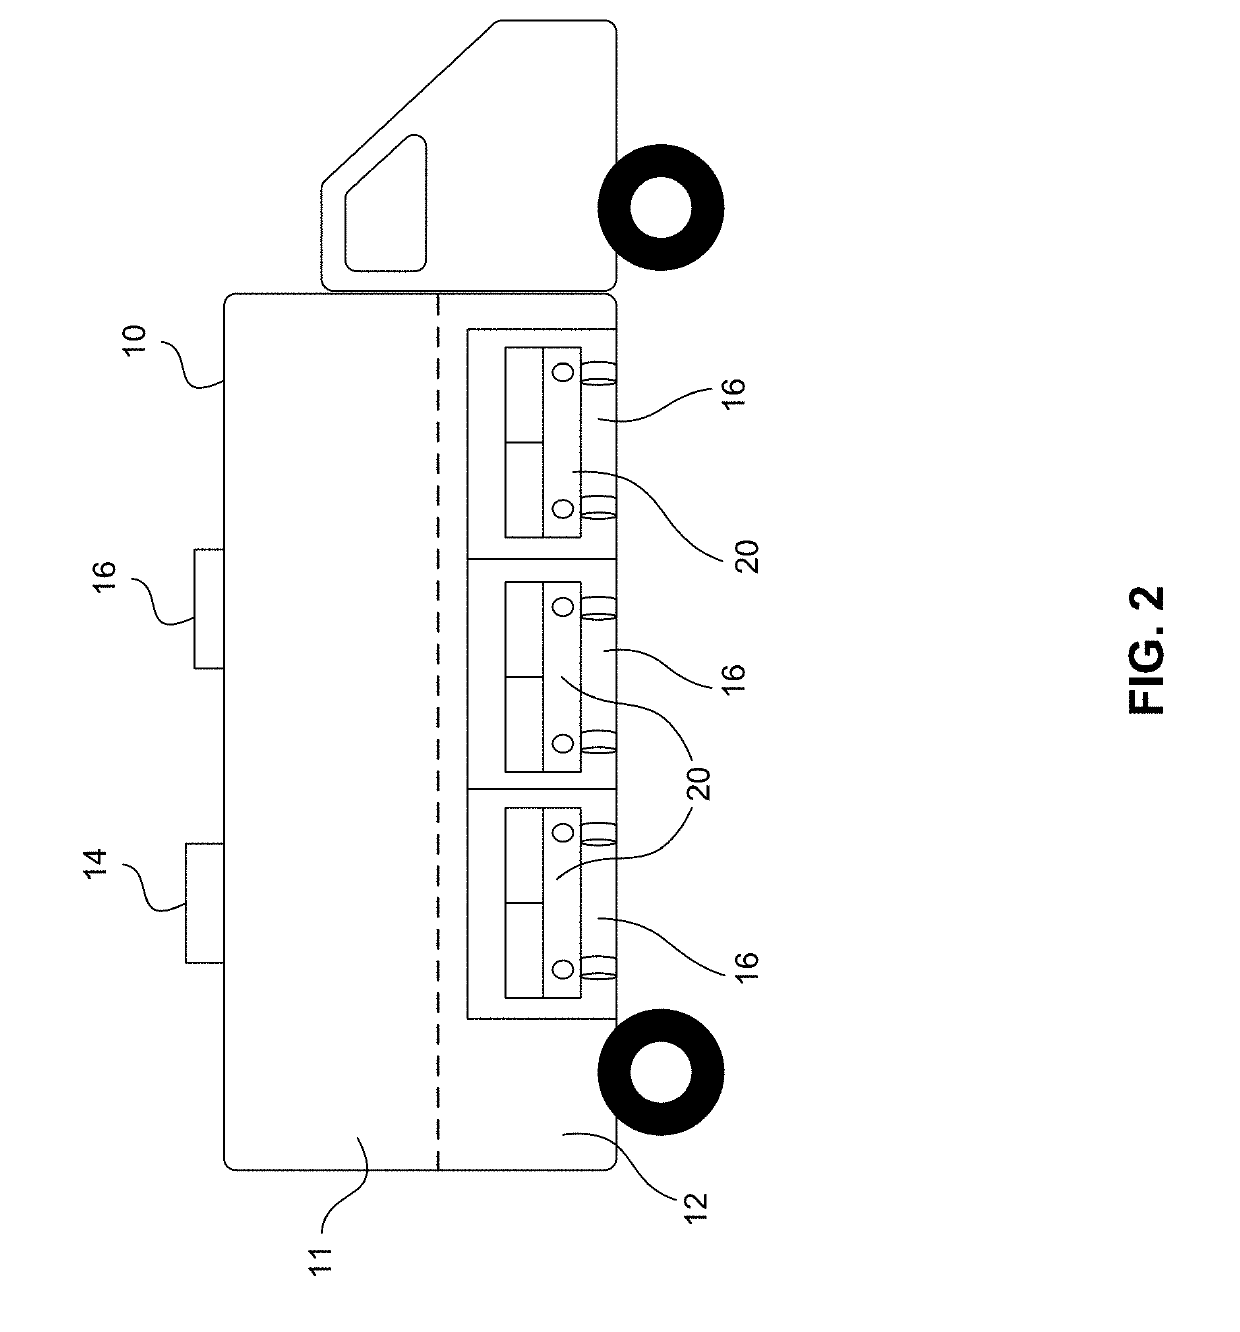 Autonomous food product delivery vehicle system and method